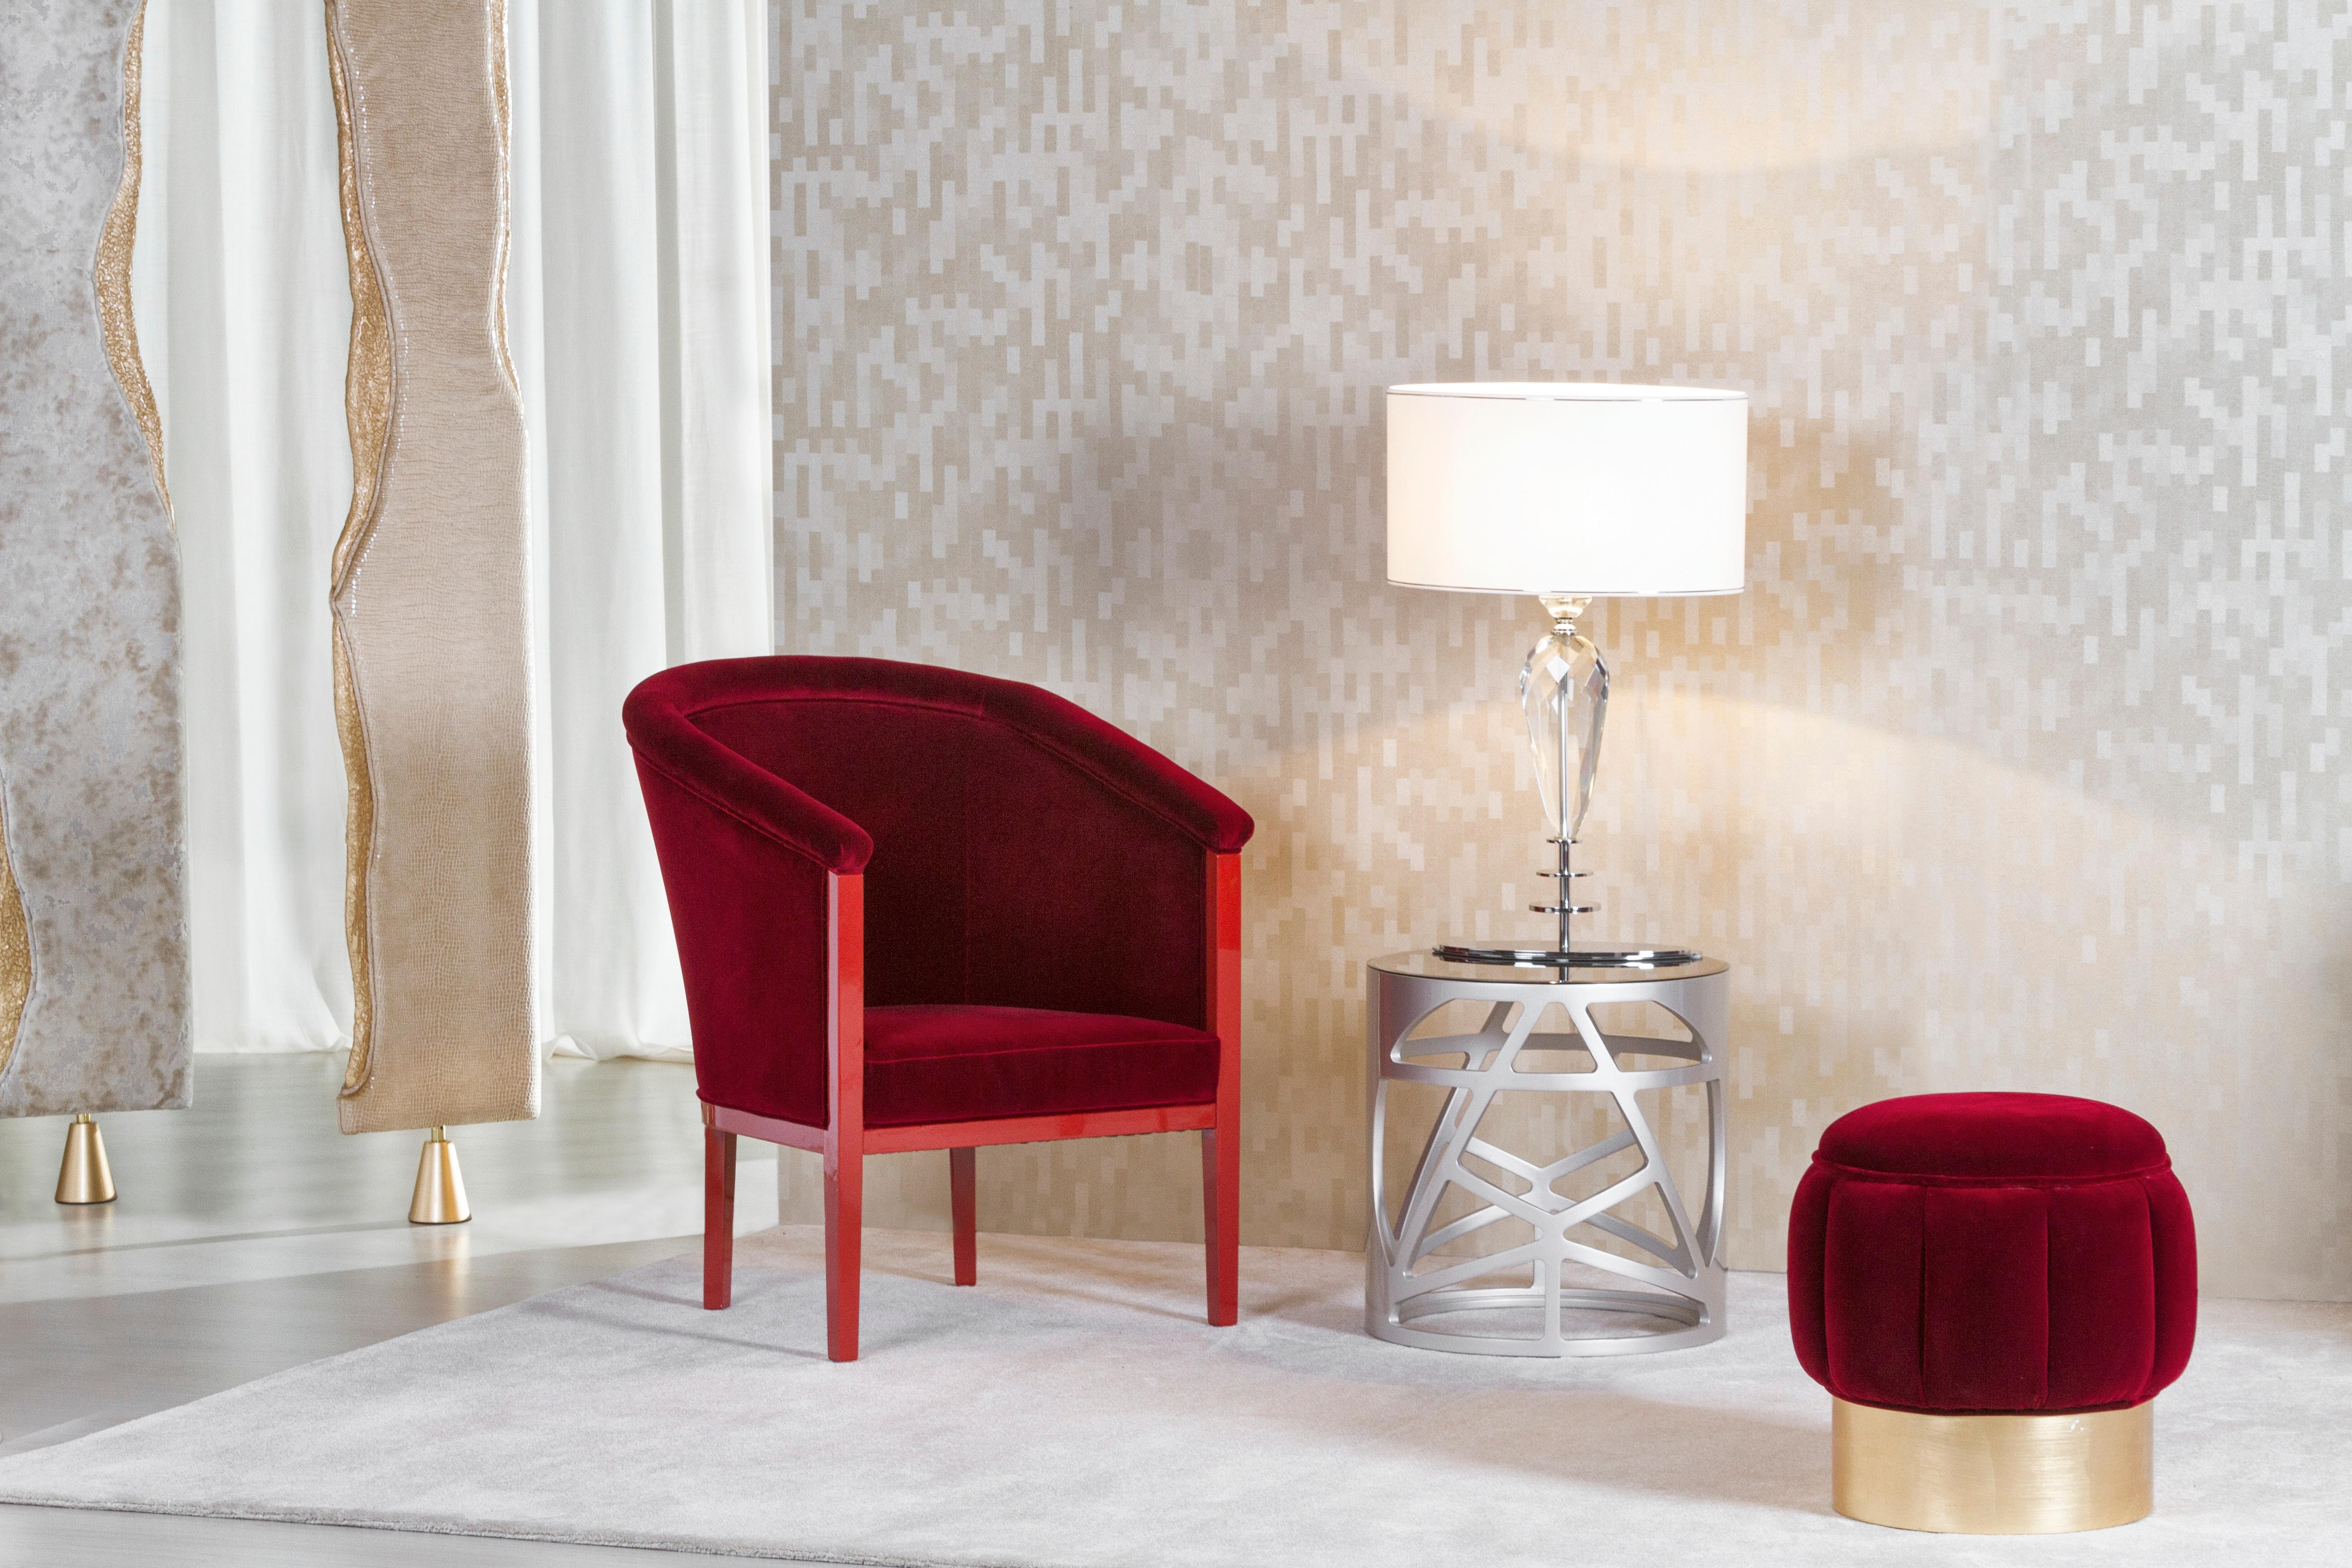 Scarlet Armchair, Contemporary Collection, Handcrafted in Portugal - Europe by Greenapple.

Scarlet puts a modern twist on the traditional armchair.
The sumptuous upholstery in red velvet from Dedar goes together effortlessly with the comfortable